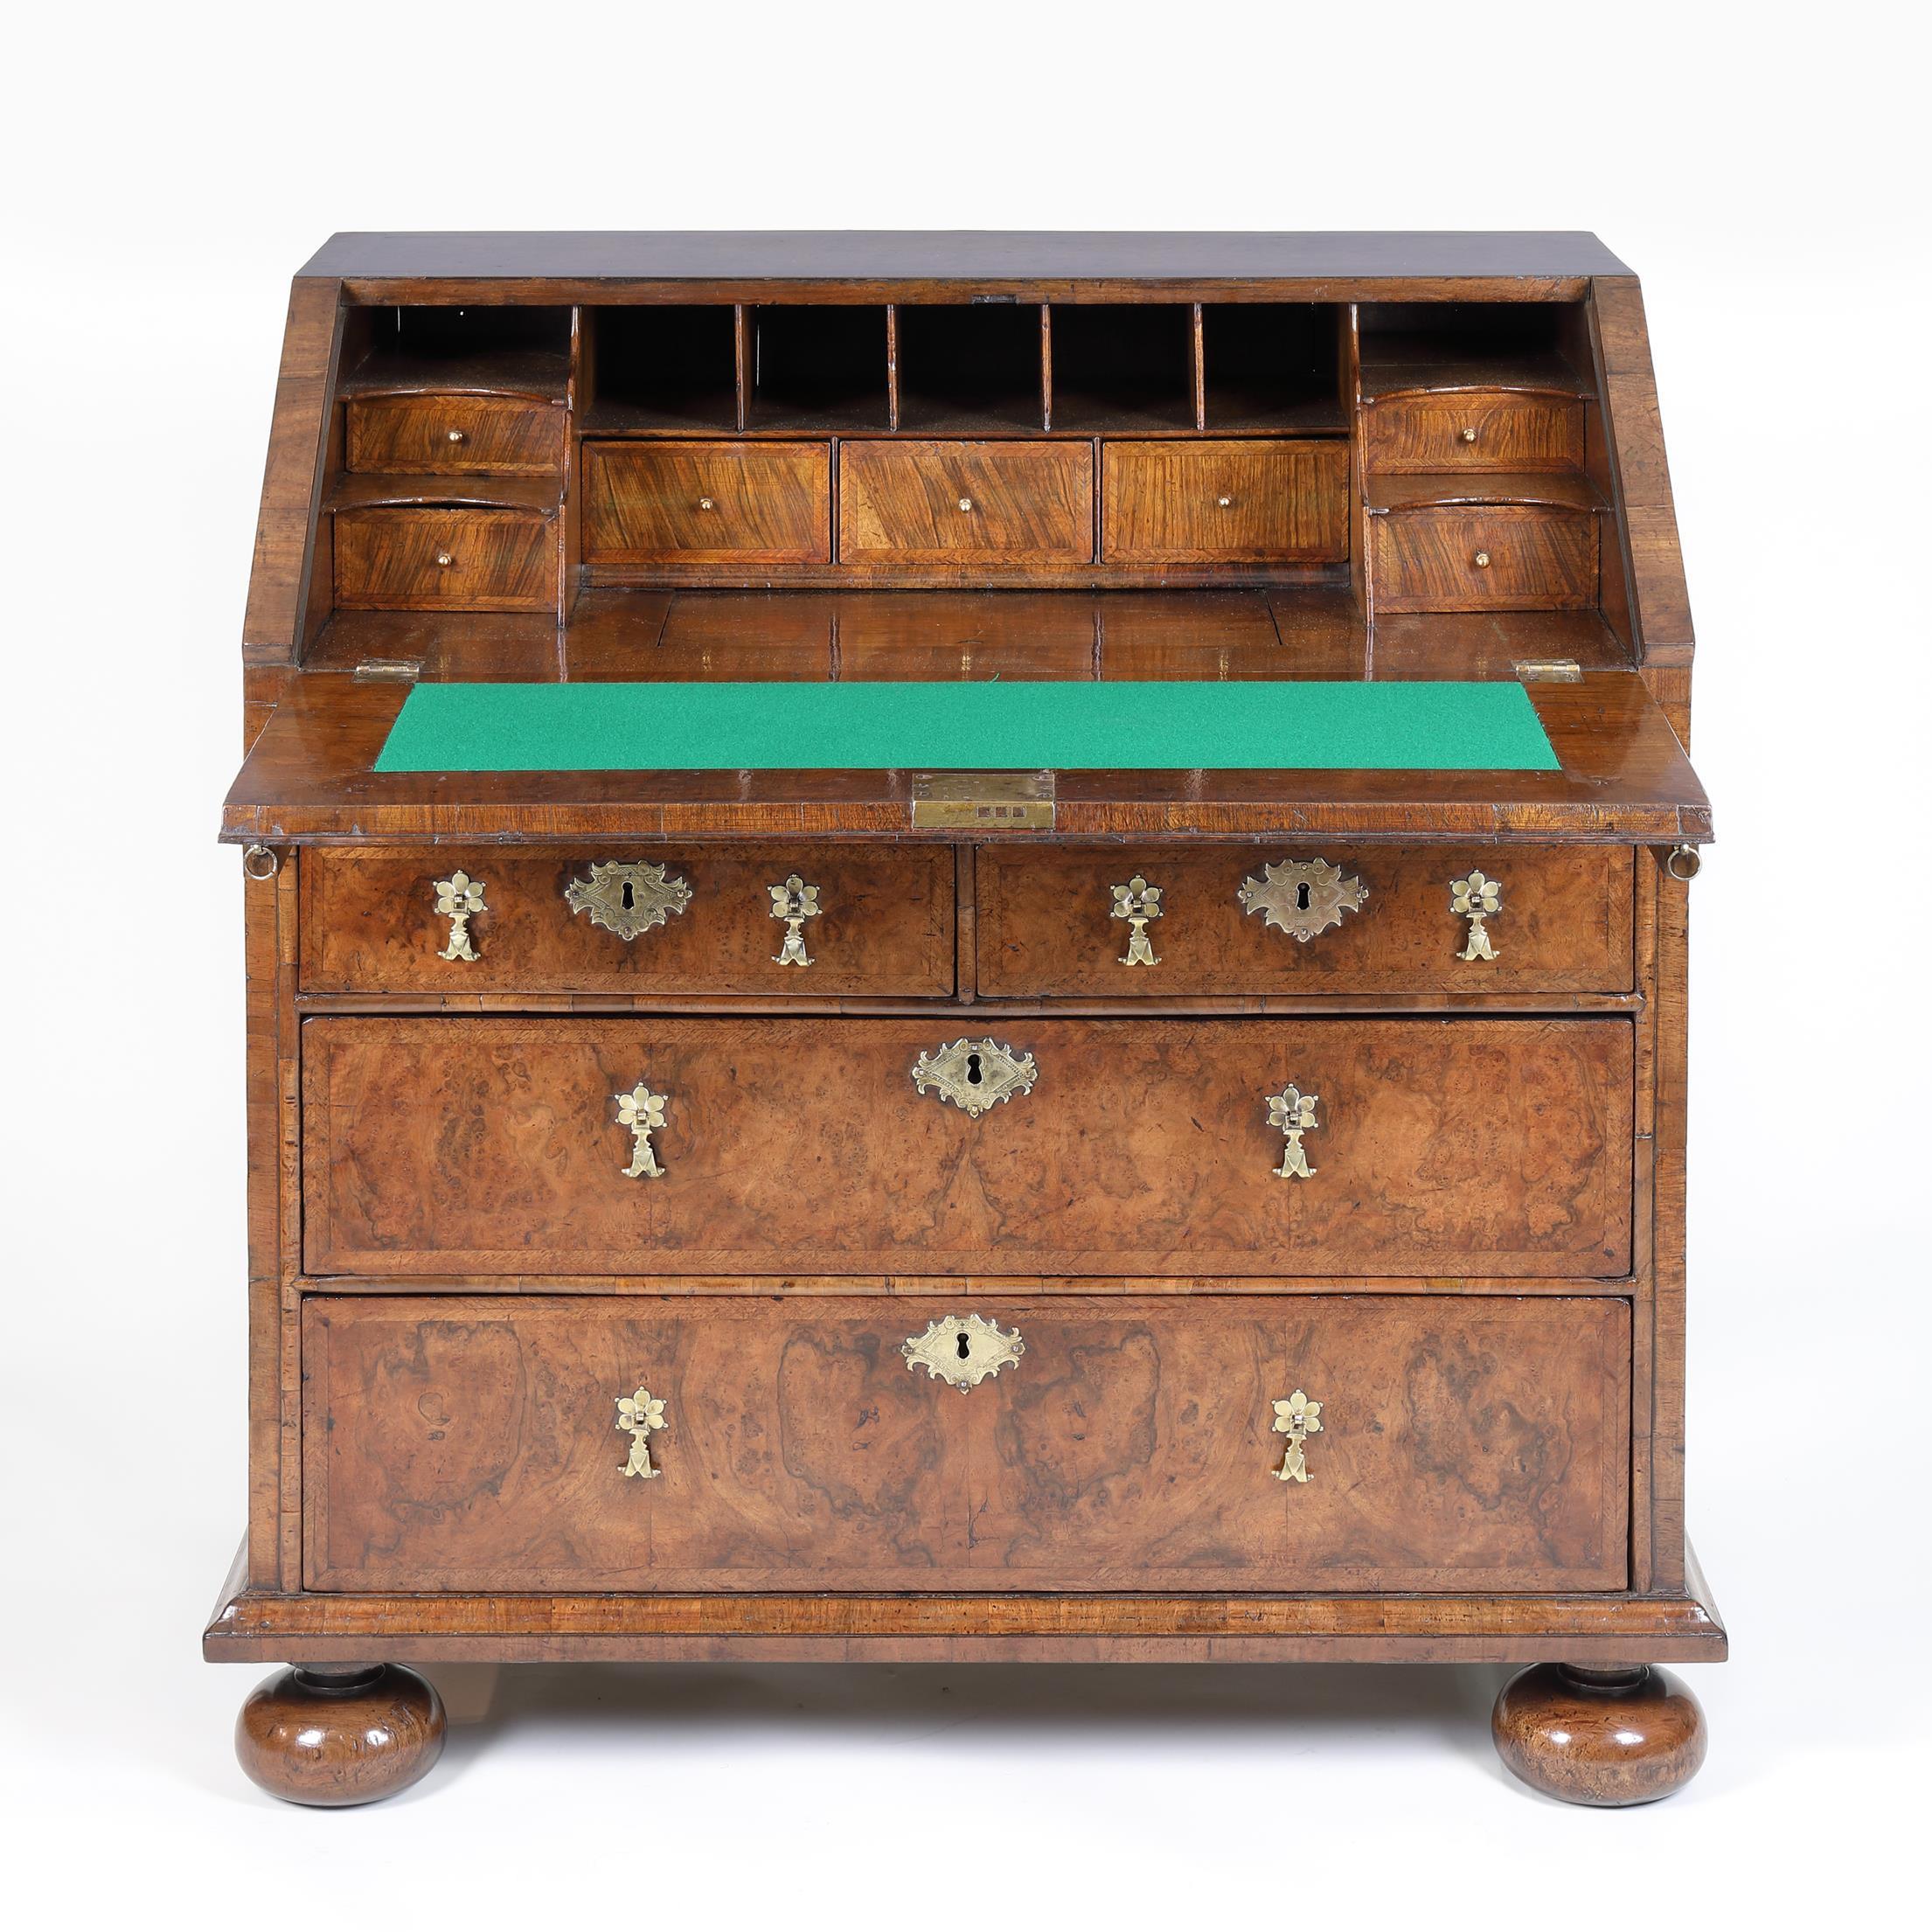 A superior quality Queen Anne period, burr walnut bureau in superb condition and of outstanding colour with curly grain figuring and deep, rich patina. The shallow sloping fall enclosing a well-executed stepped interior with small drawers and